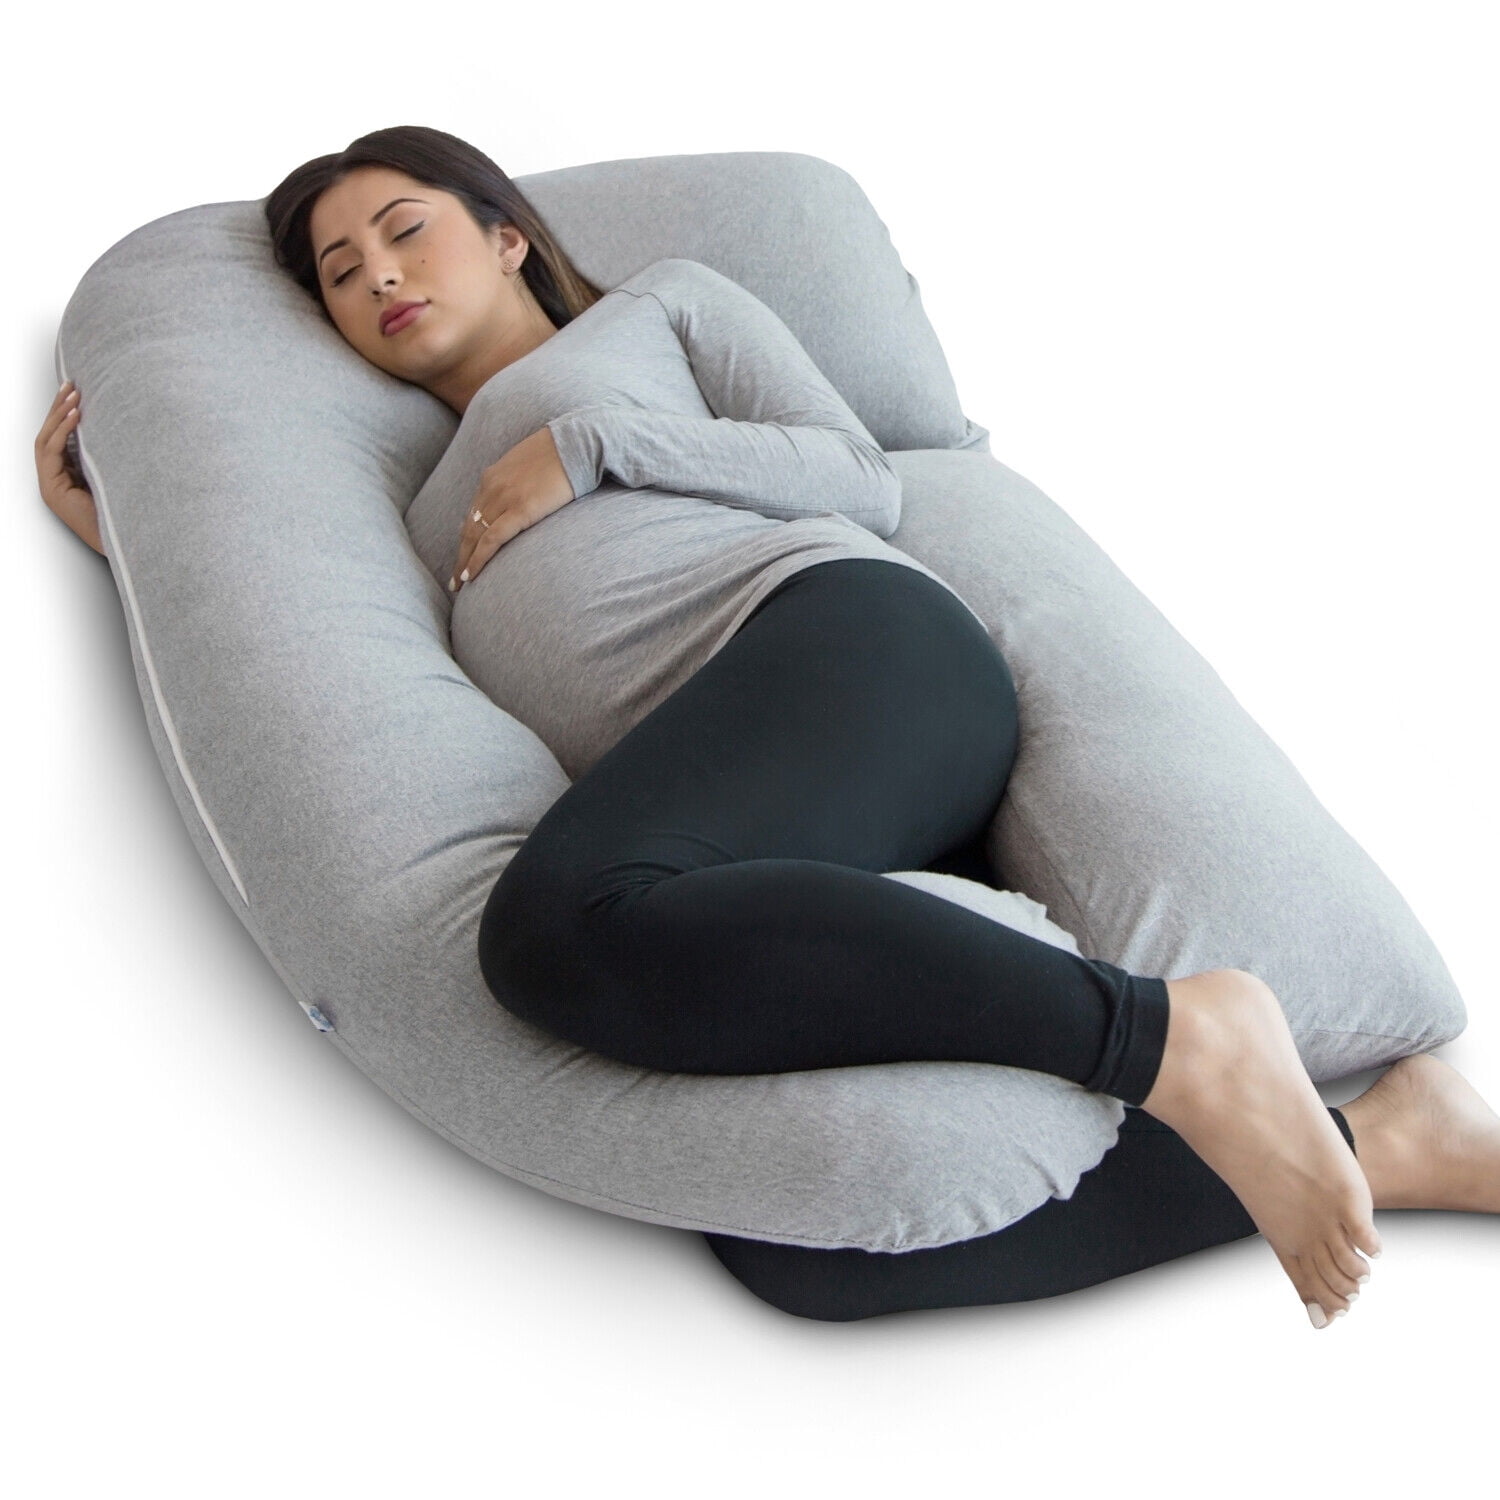 heks landinwaarts Slovenië PharMeDoc Pregnancy Pillow, U-Shape Full Body Pillow and Maternity Support  with Detachable Extension - Support for Back, Hips, Legs, Belly for  Pregnant Women - Walmart.com